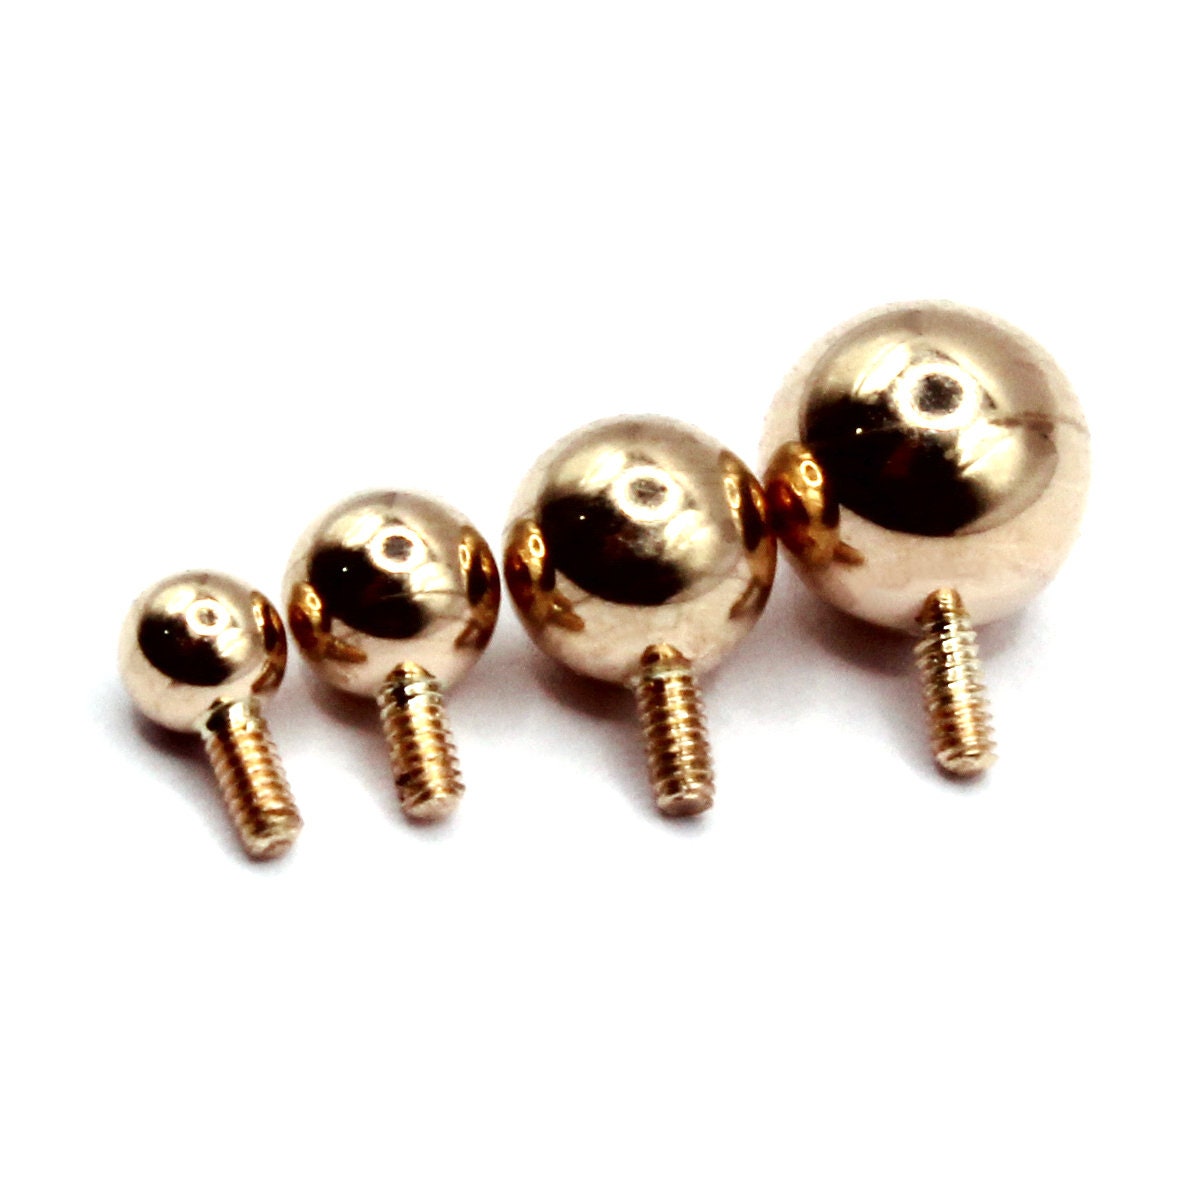 Spare Extra Replacement Gold Screw Backs, Screw Back for Threaded Post  Earrings, for 1000 Jewels Screw-back Earrings, 2 Sizes, Earring Backs 